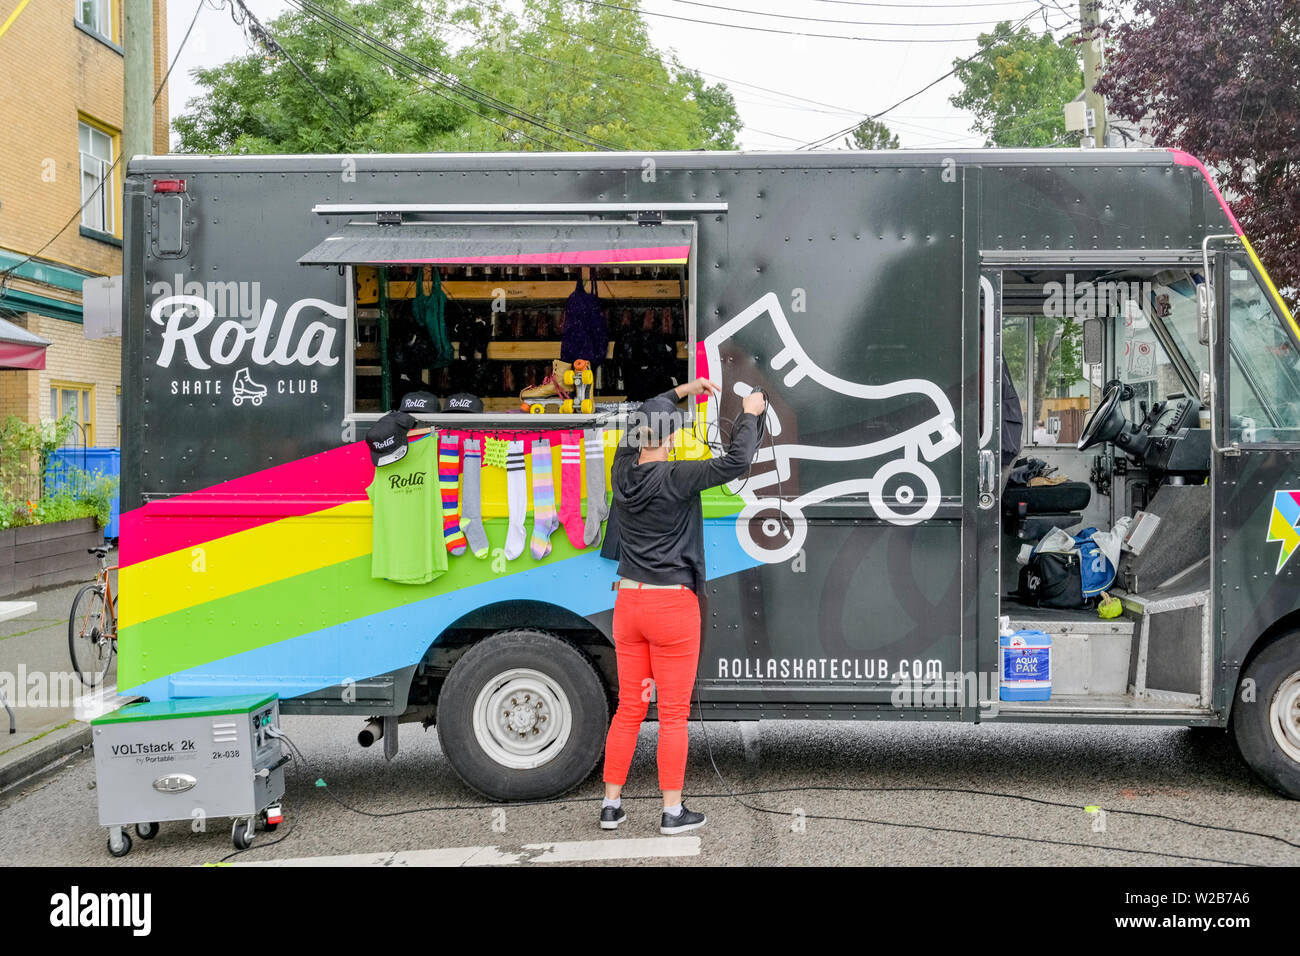 Rolla Roller Skate Club Truck, Car Free Day, Commercial Drive, Vancouver, British Columbia, Canada Stock Photo